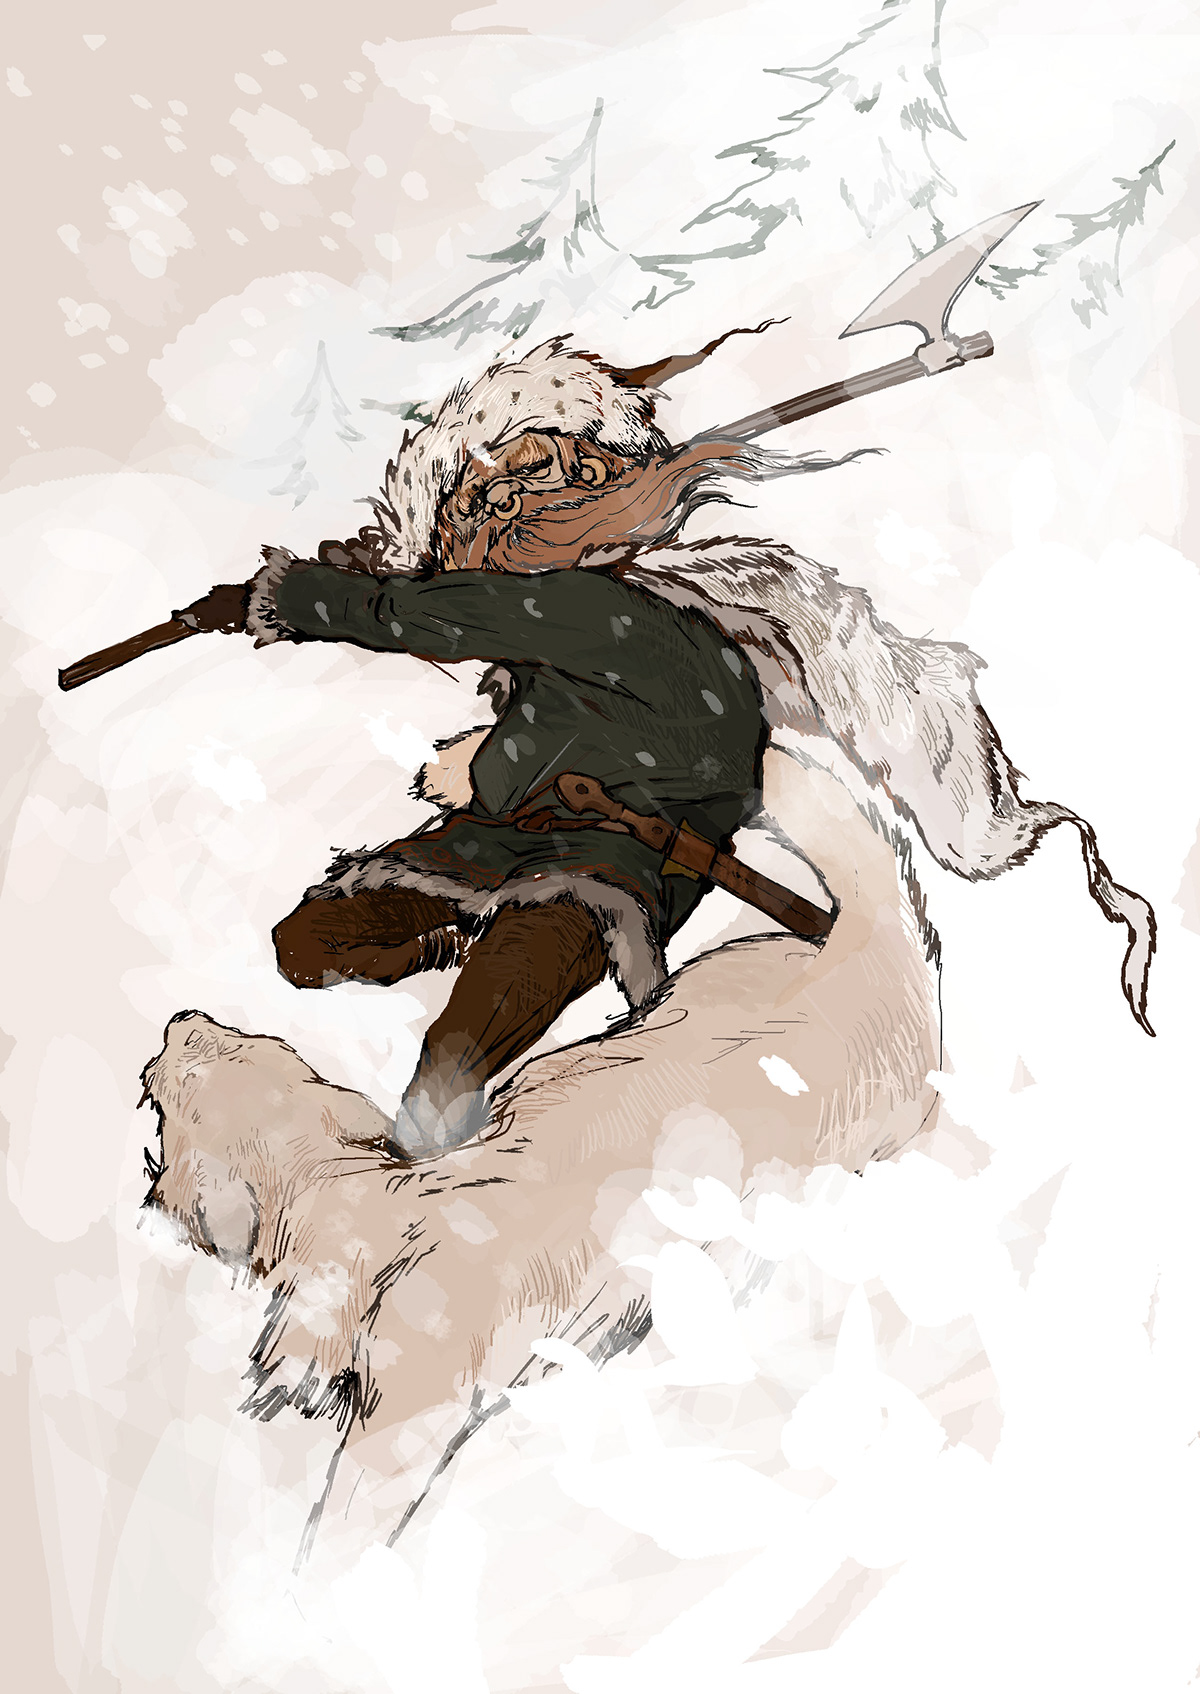 ILLUSTRATION  Drawing  painting   Character fantasy characterdesign design graphic